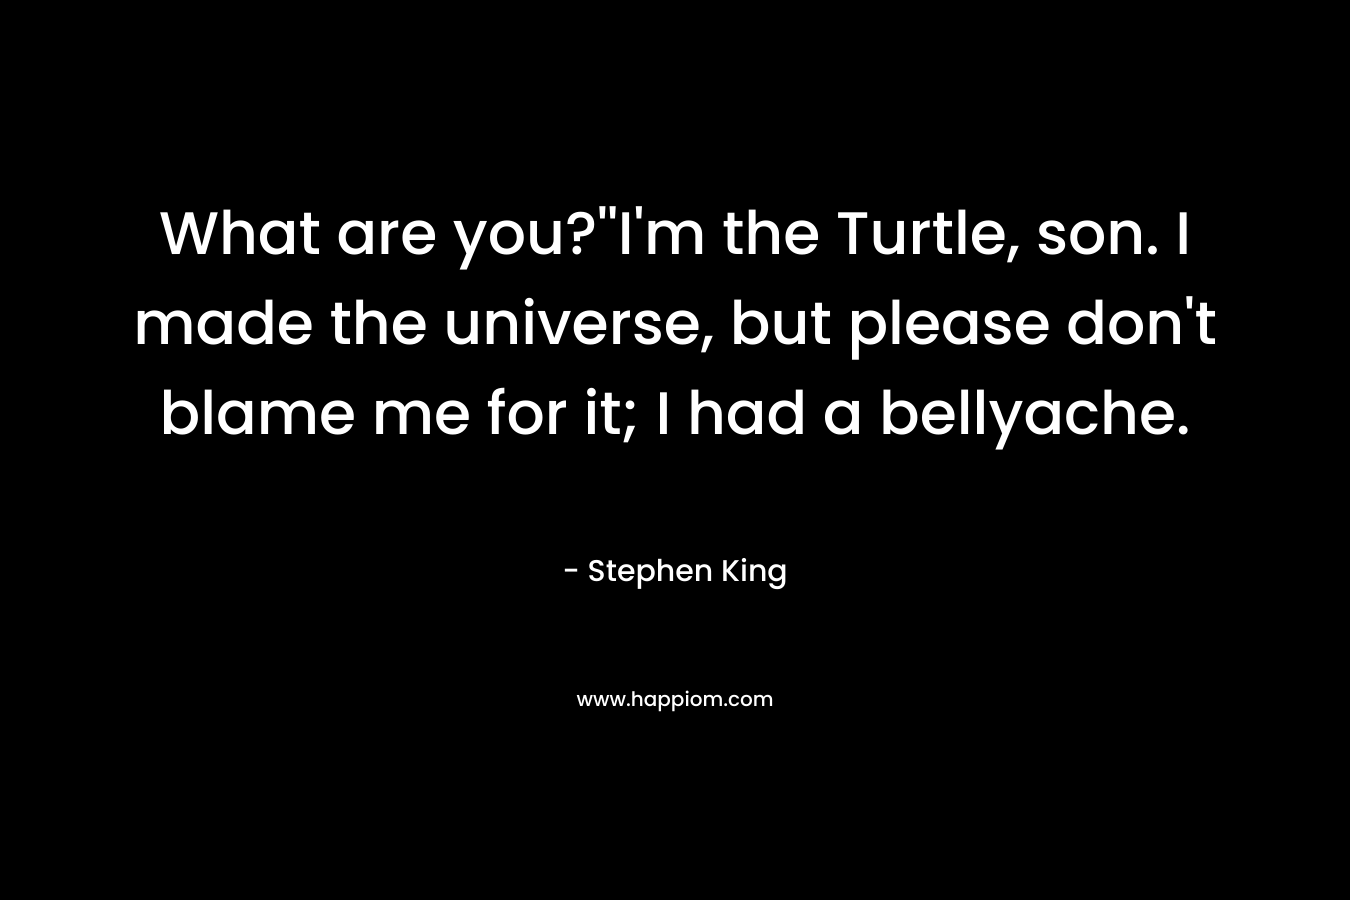 What are you?''I'm the Turtle, son. I made the universe, but please don't blame me for it; I had a bellyache.